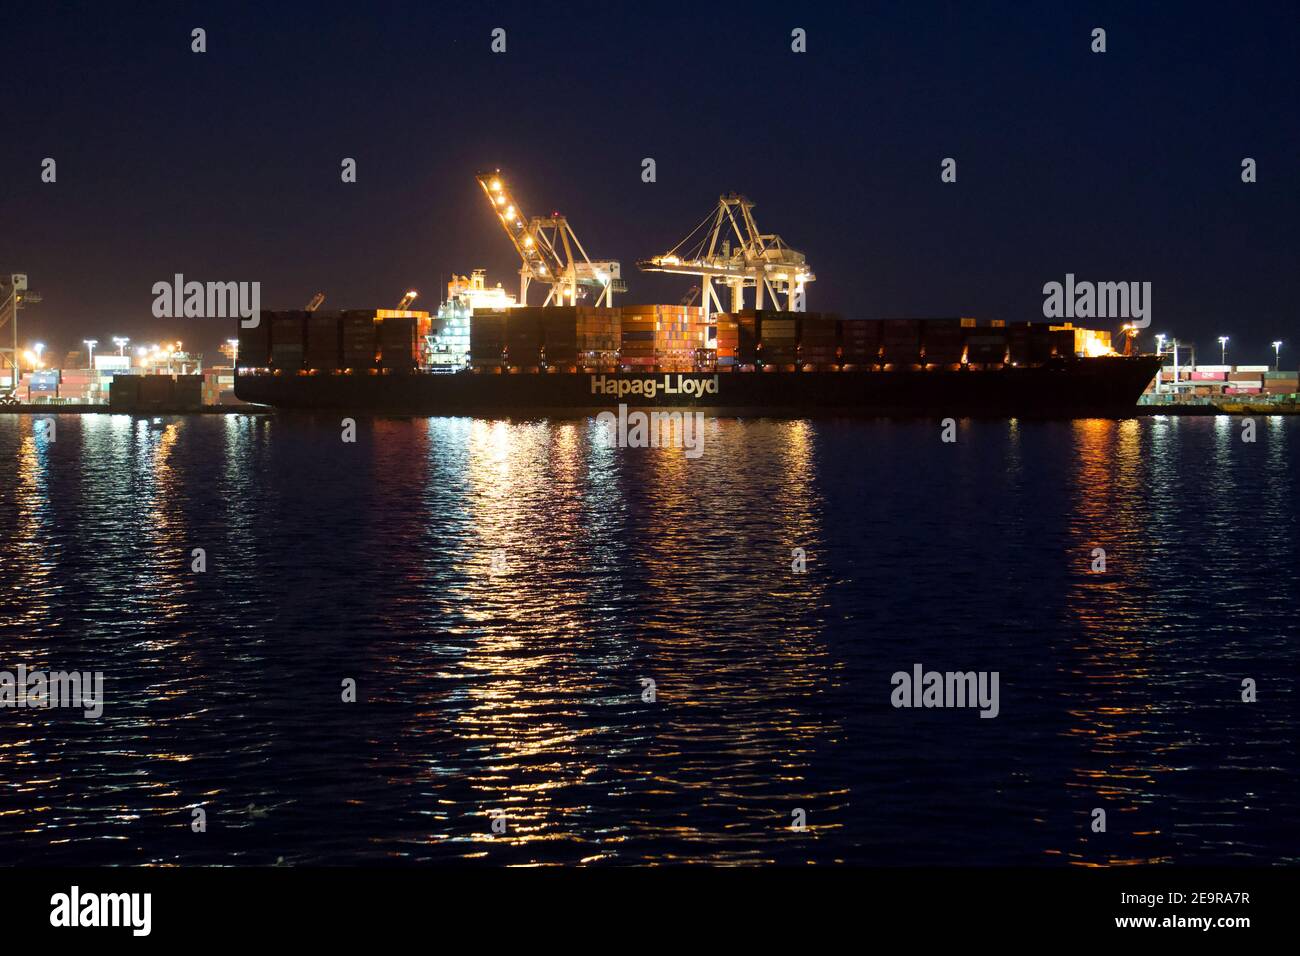 Hapag-Lloyd shipping container barge stacked with intermodal shipping containers with shipping cranes, at night. Port of Oakland, CA, USA Stock Photo